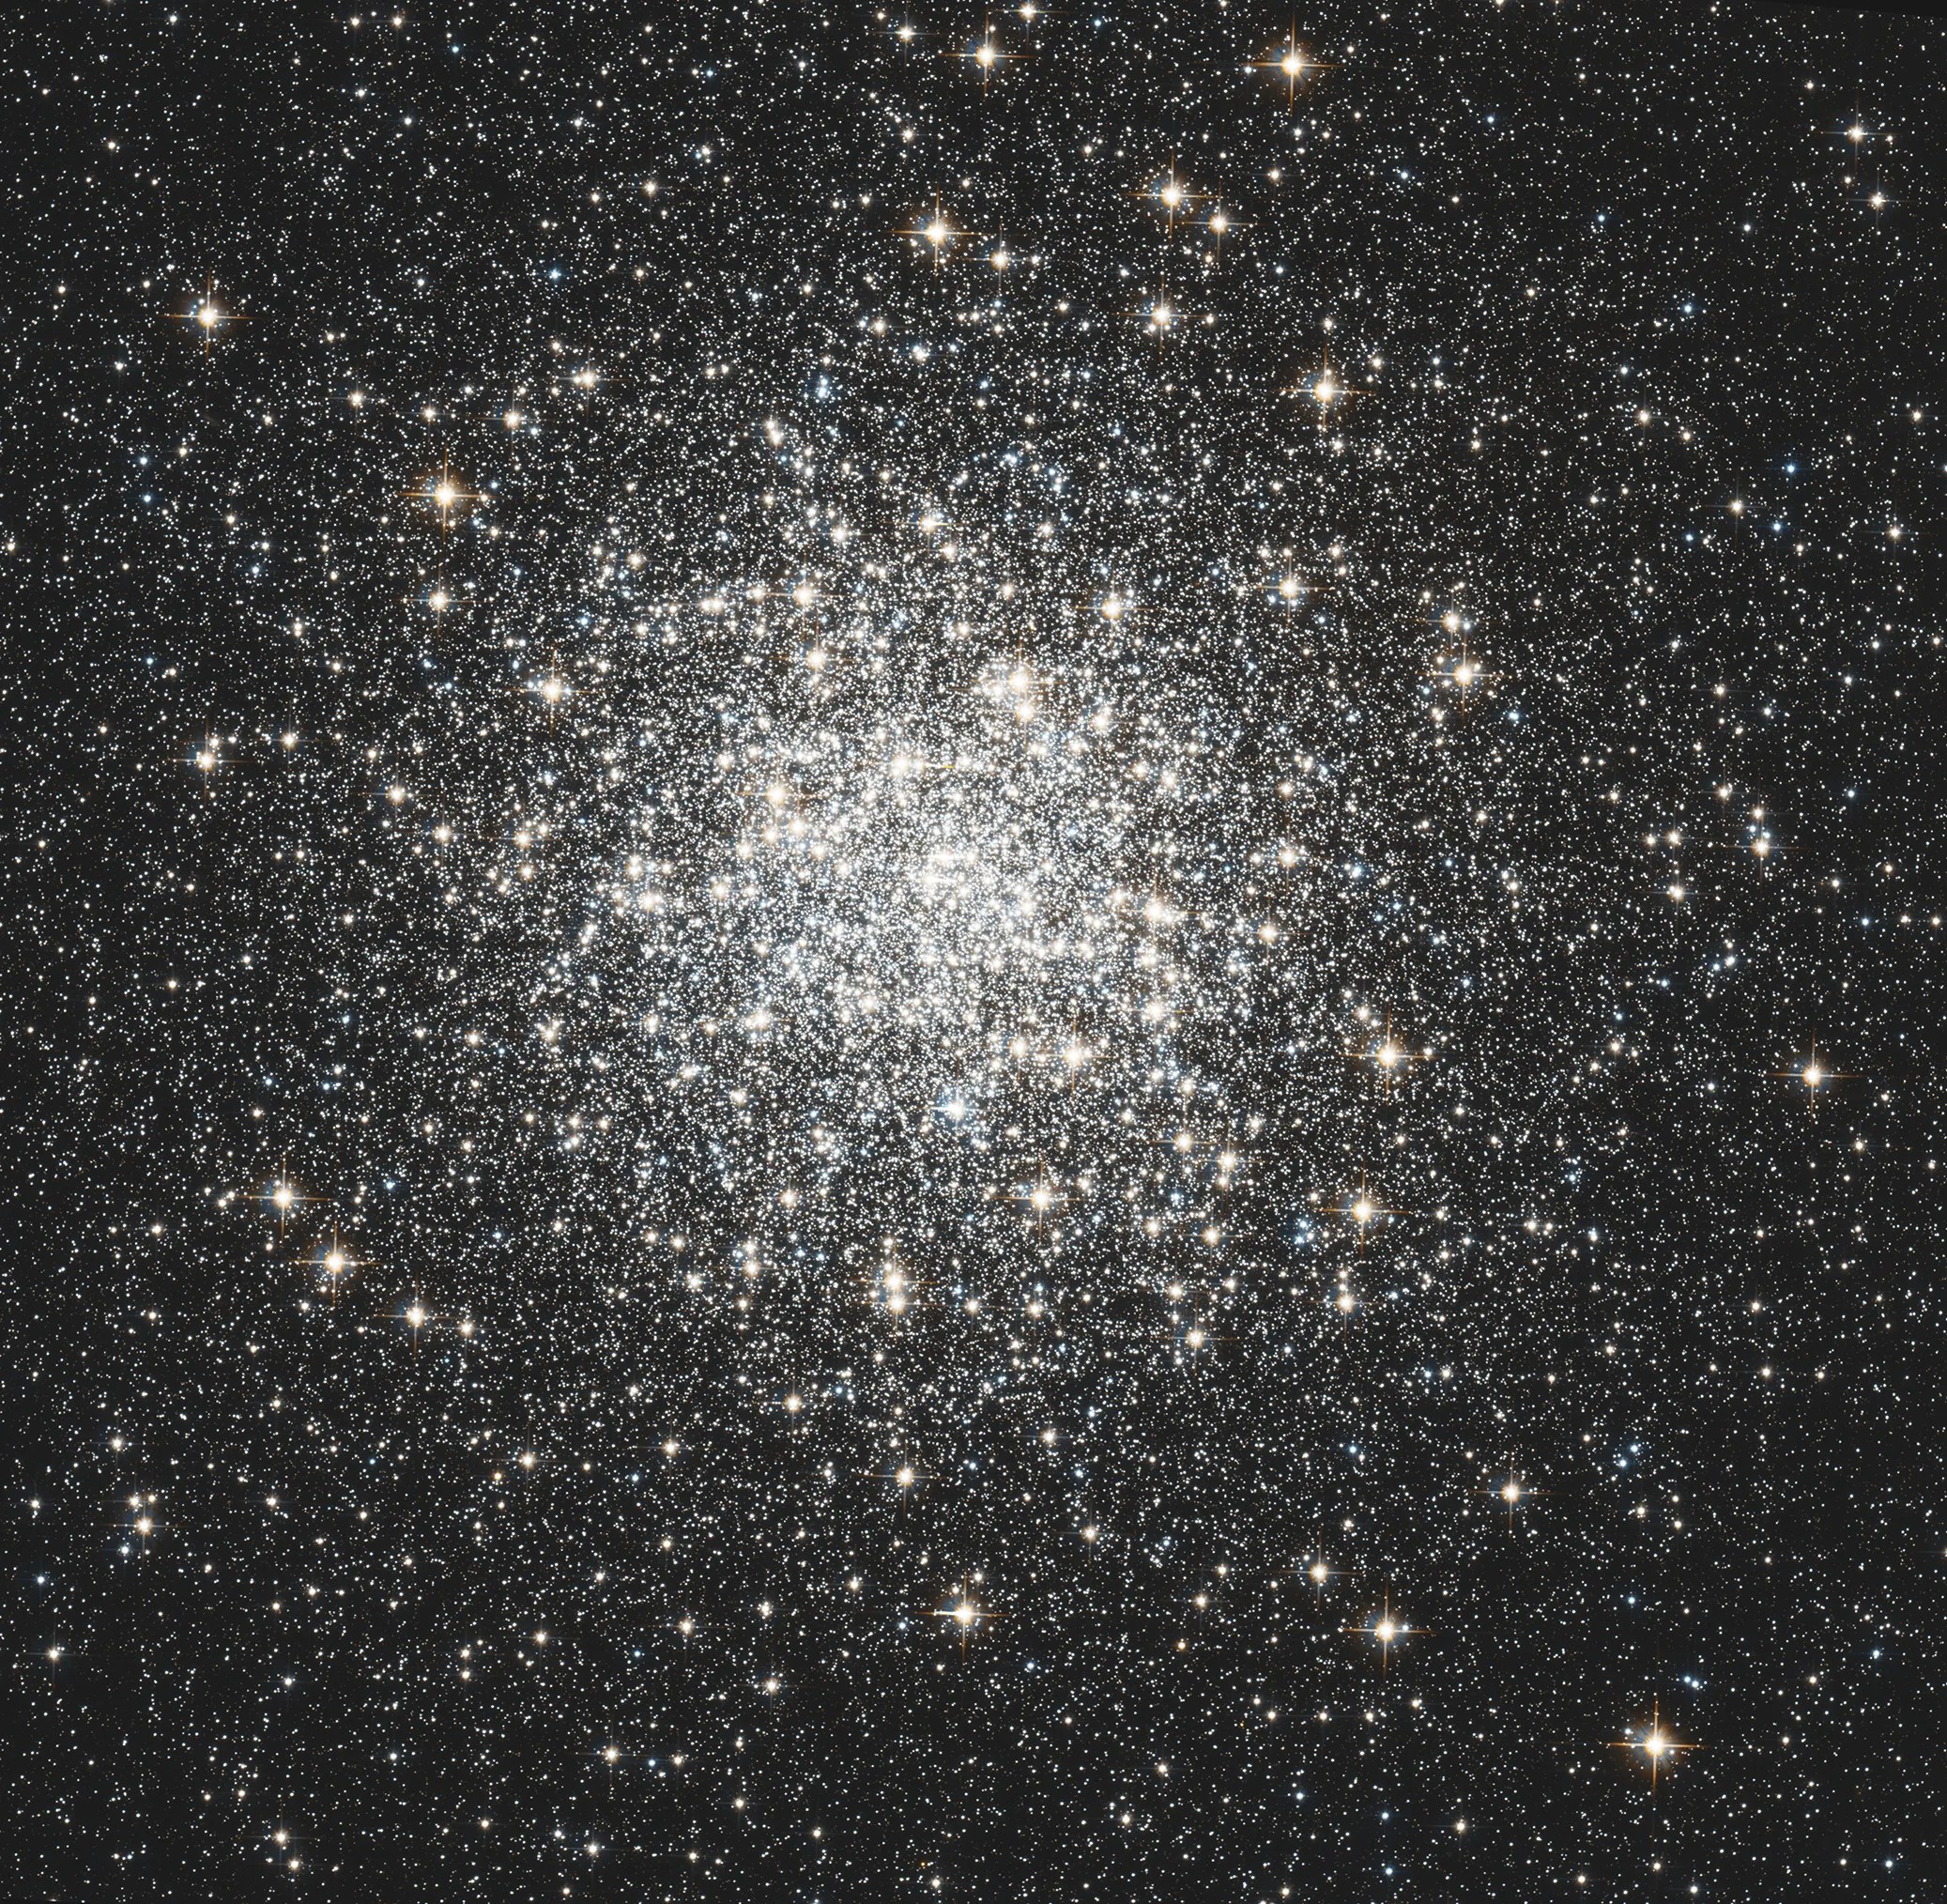 Hubble view of M3